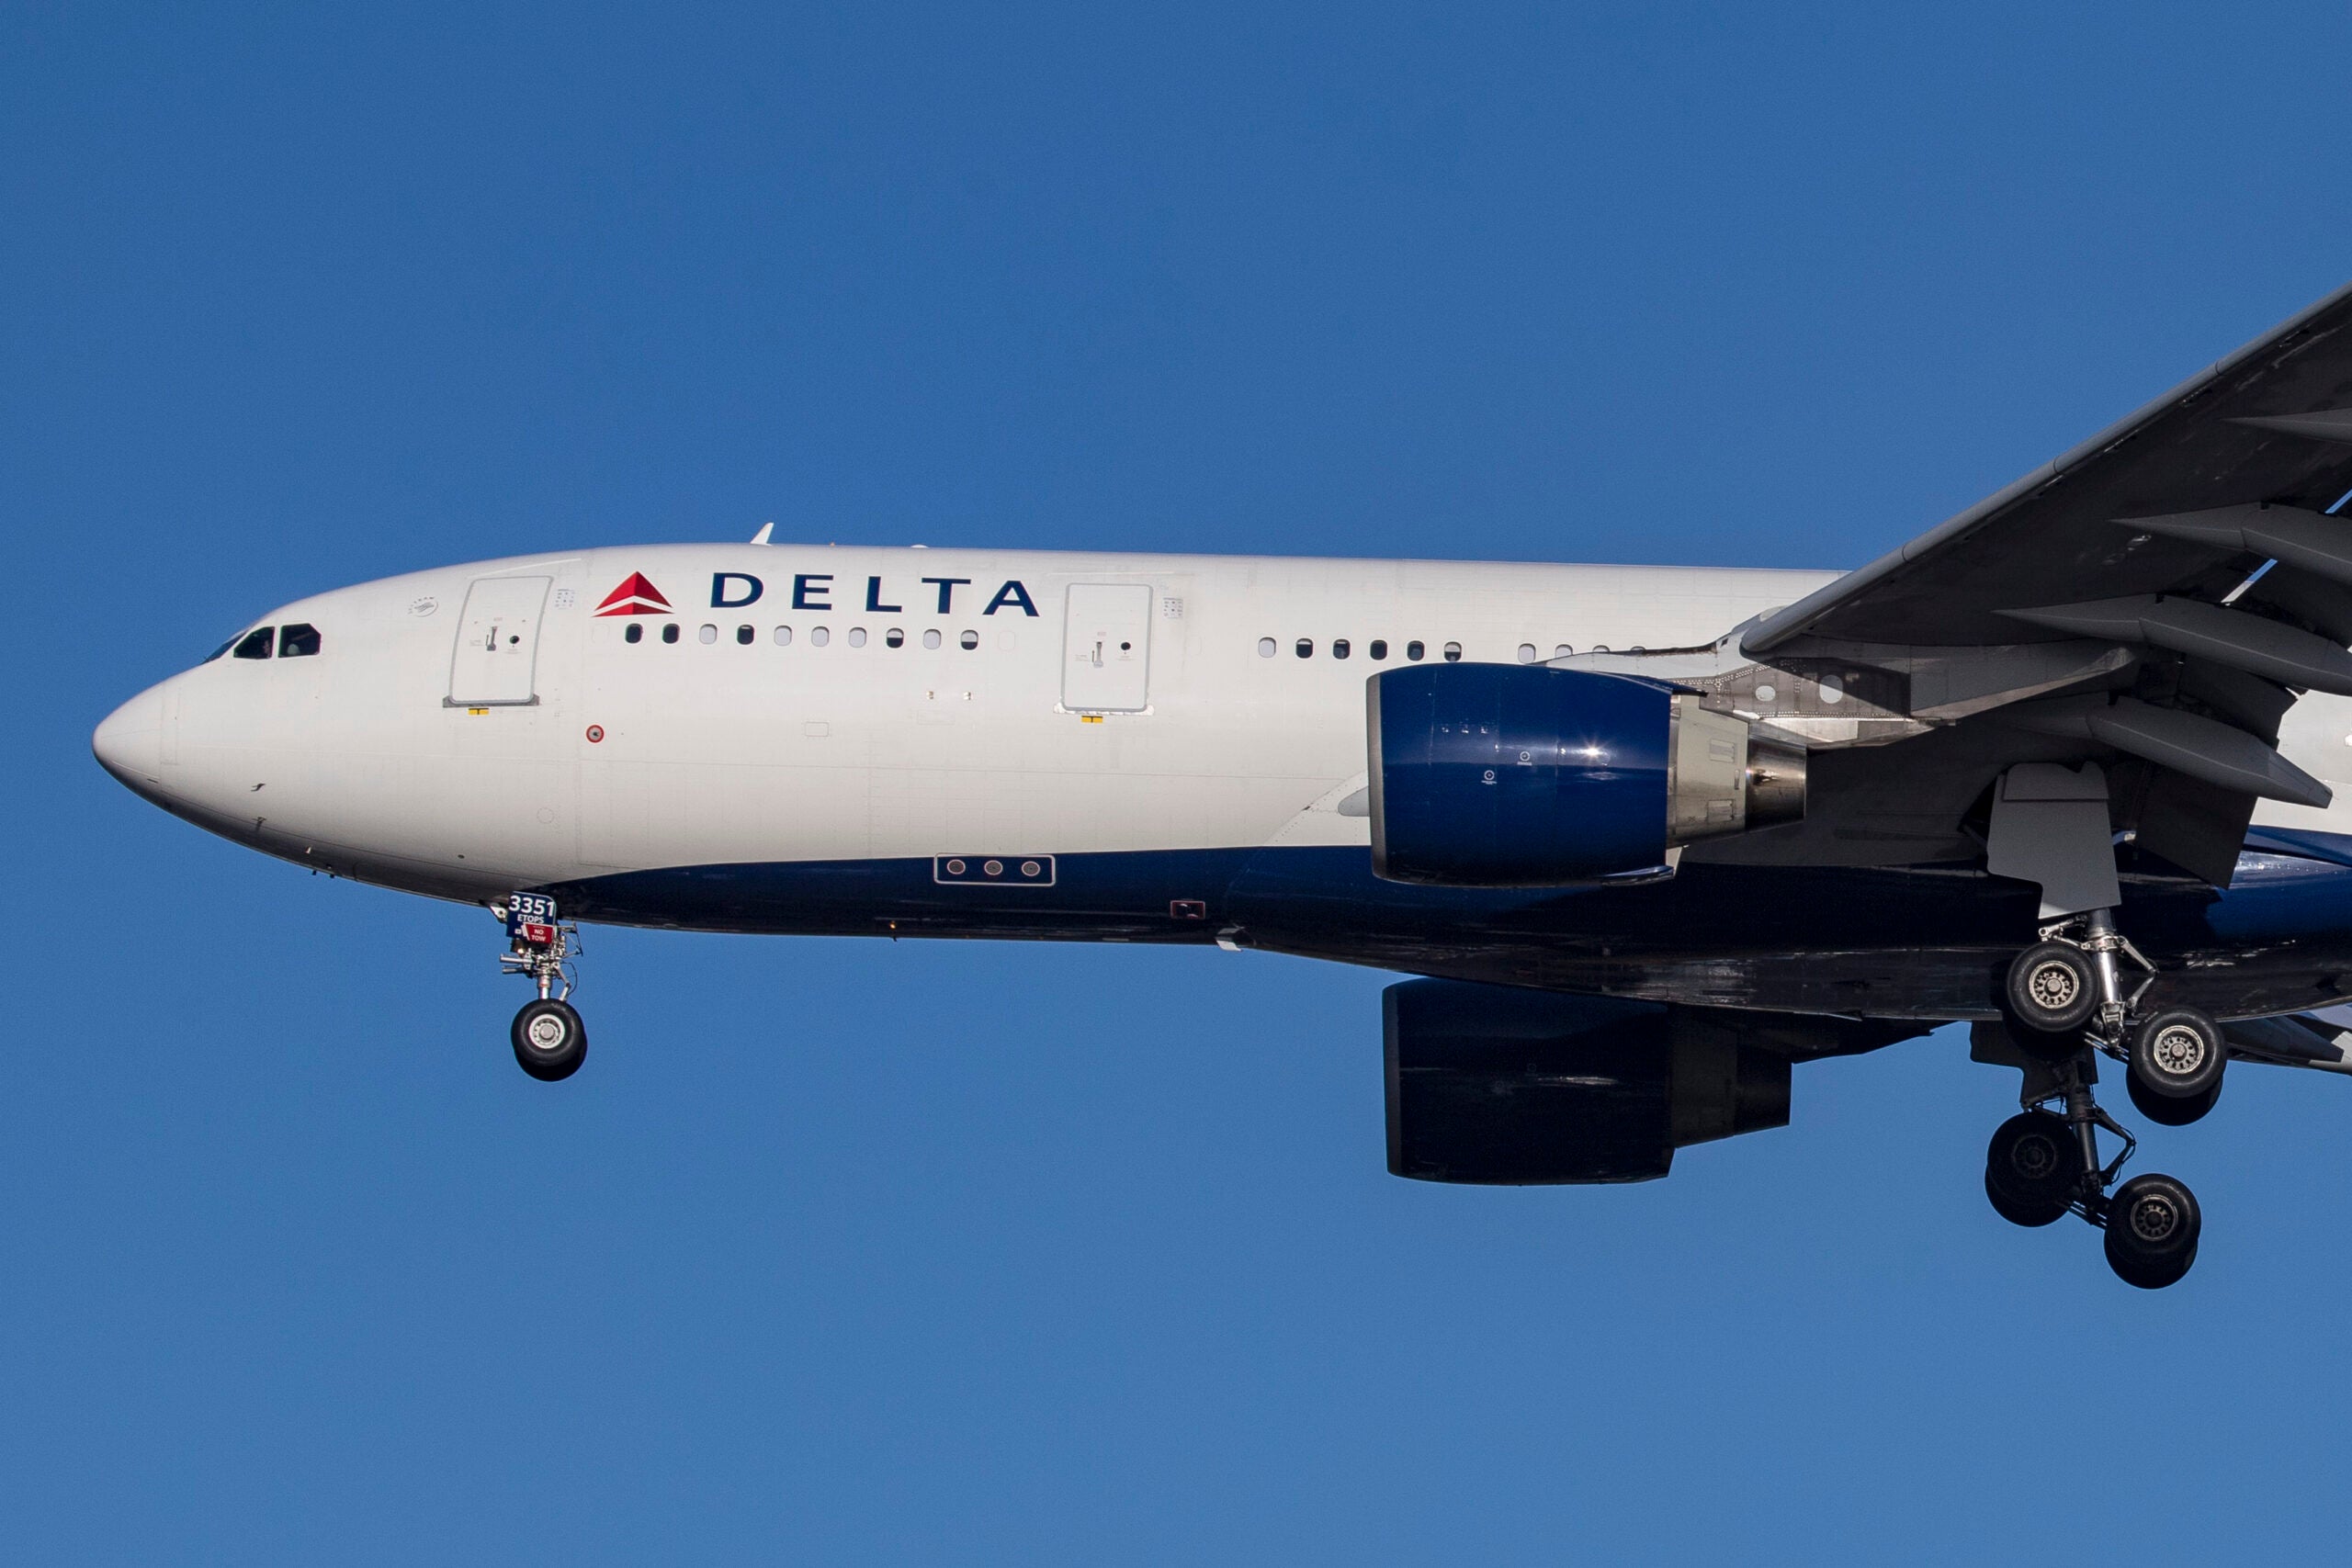 International flights are already 75% booked for the summer, Delta says